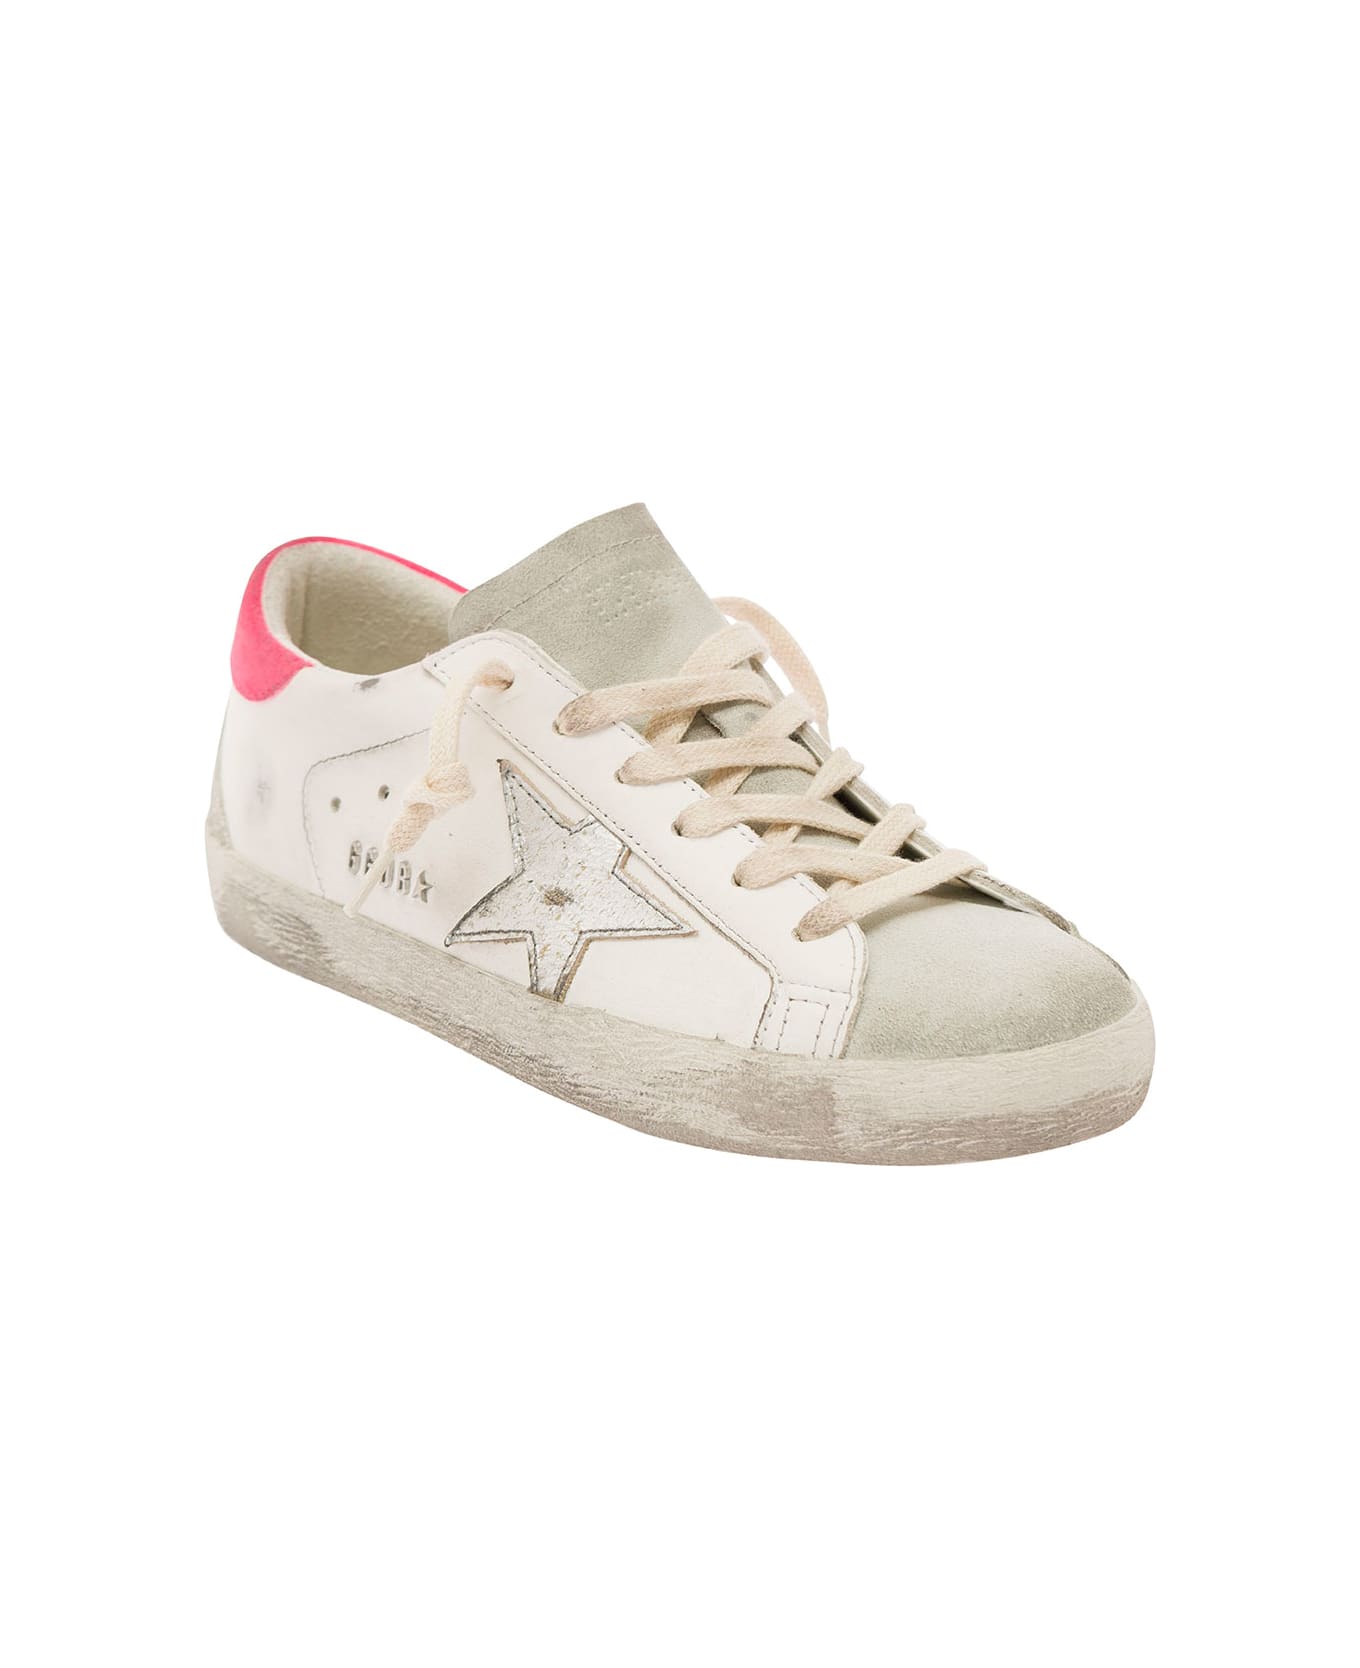 Golden Goose 'superstar' White Low Top Vintage Effect Sneakers With Star Detail In Leather Woman - White スニーカー